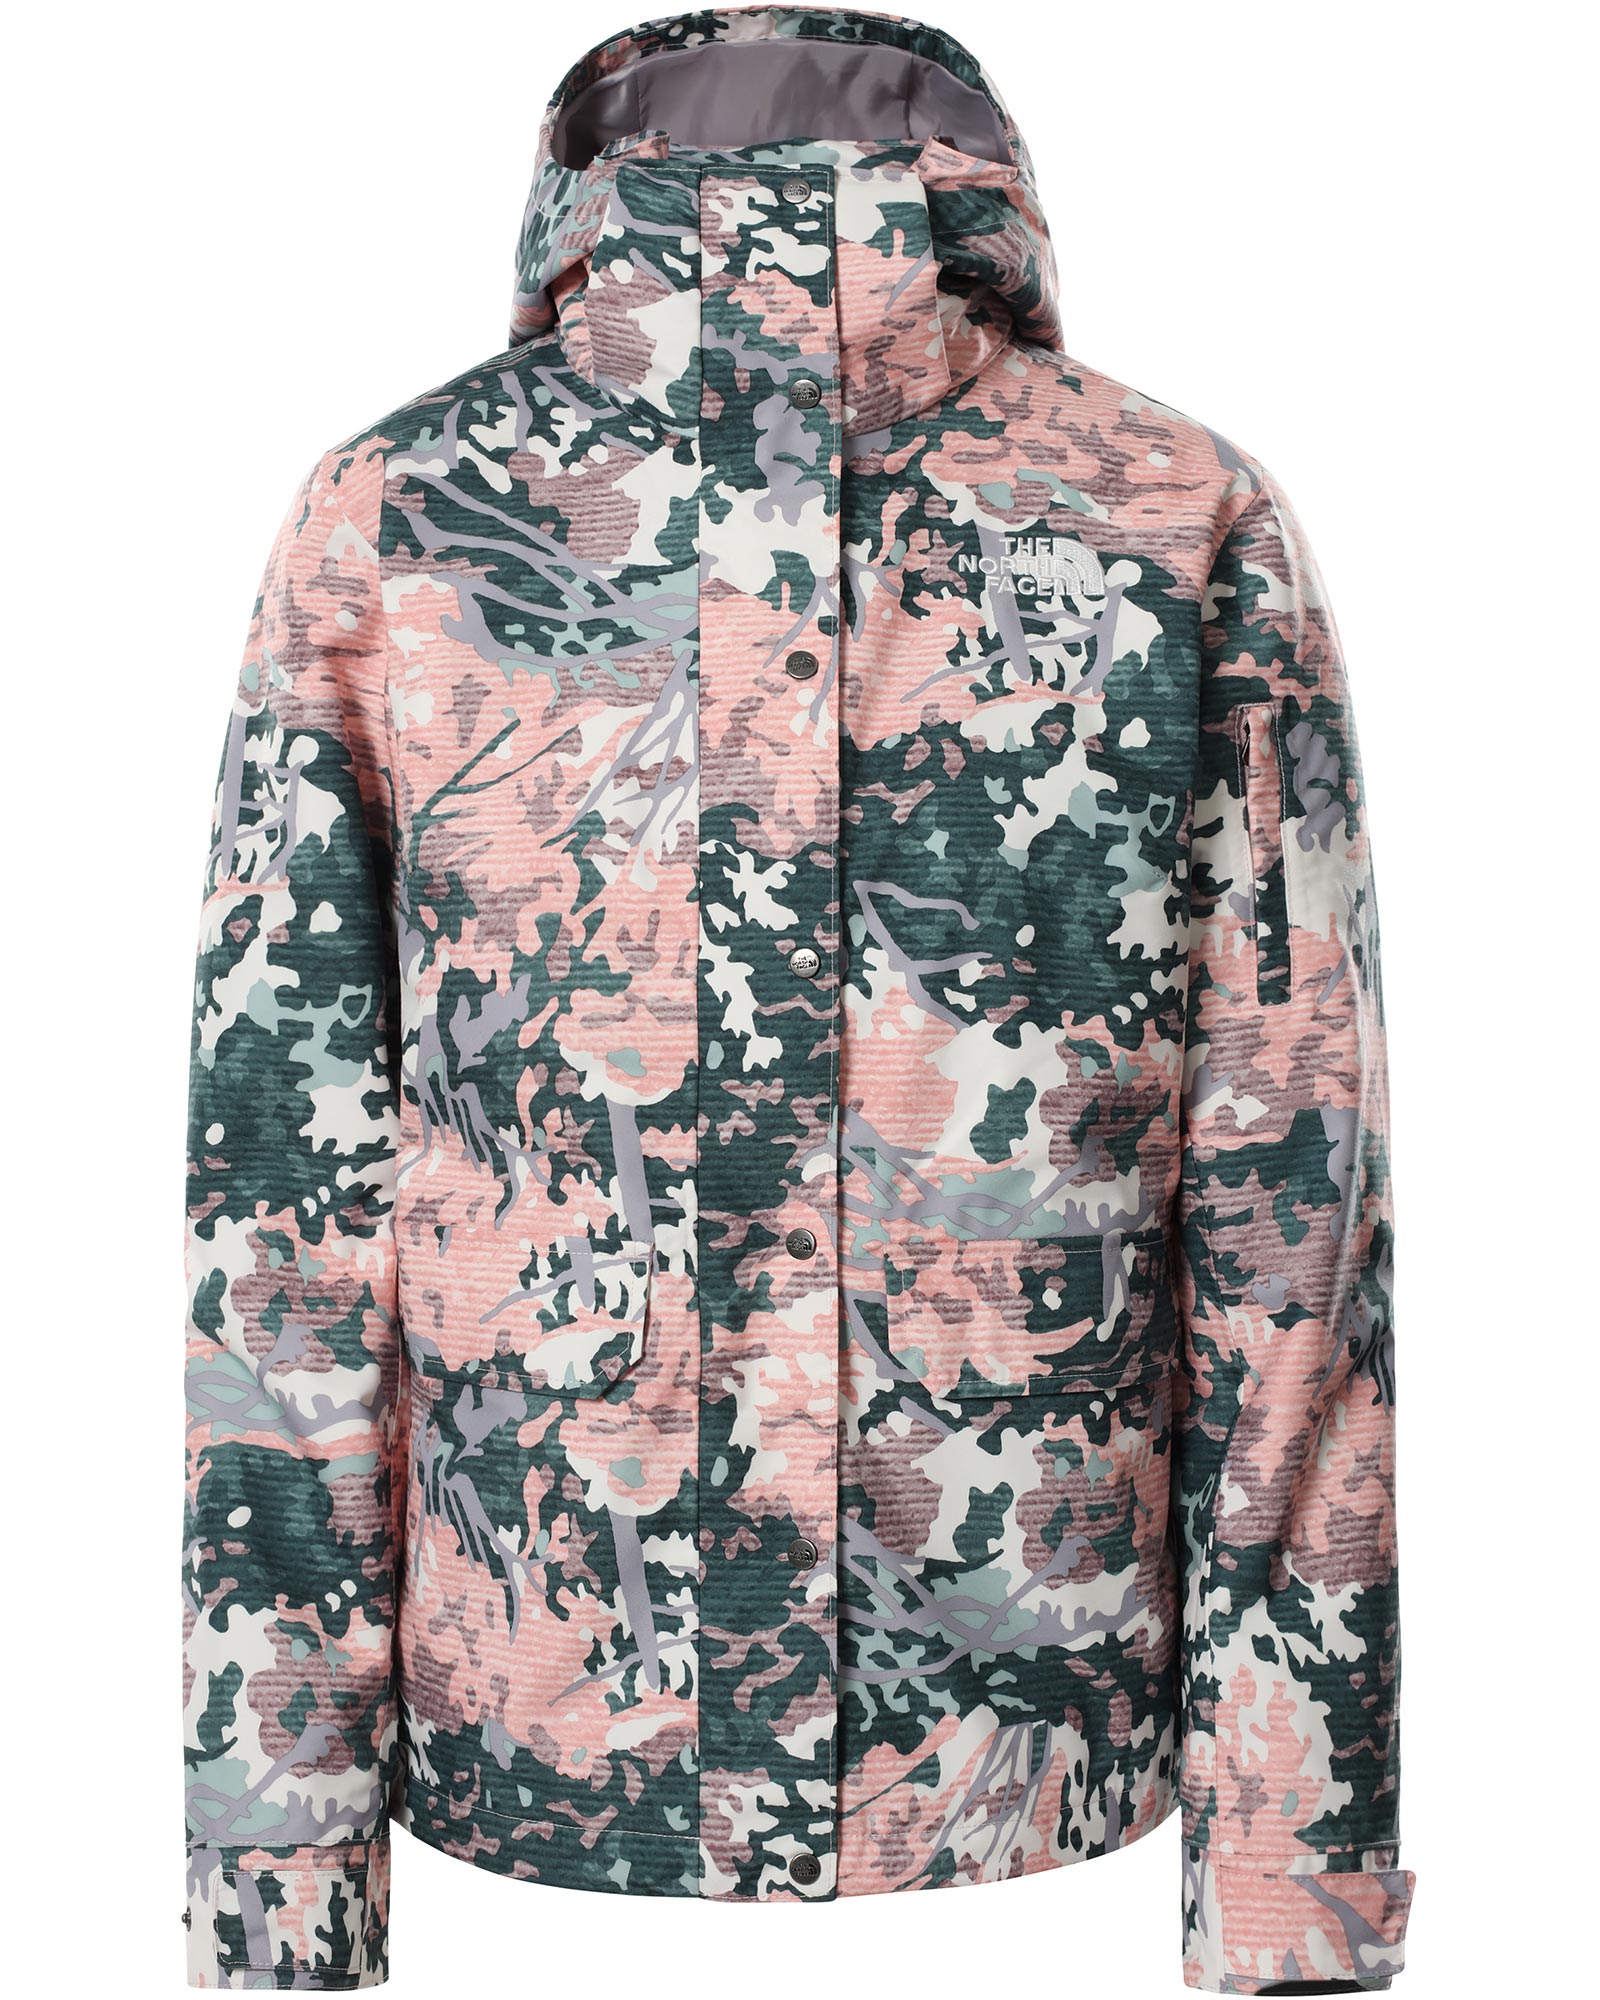 The North Face Print Pinecroft Womens Triclimate Jacket